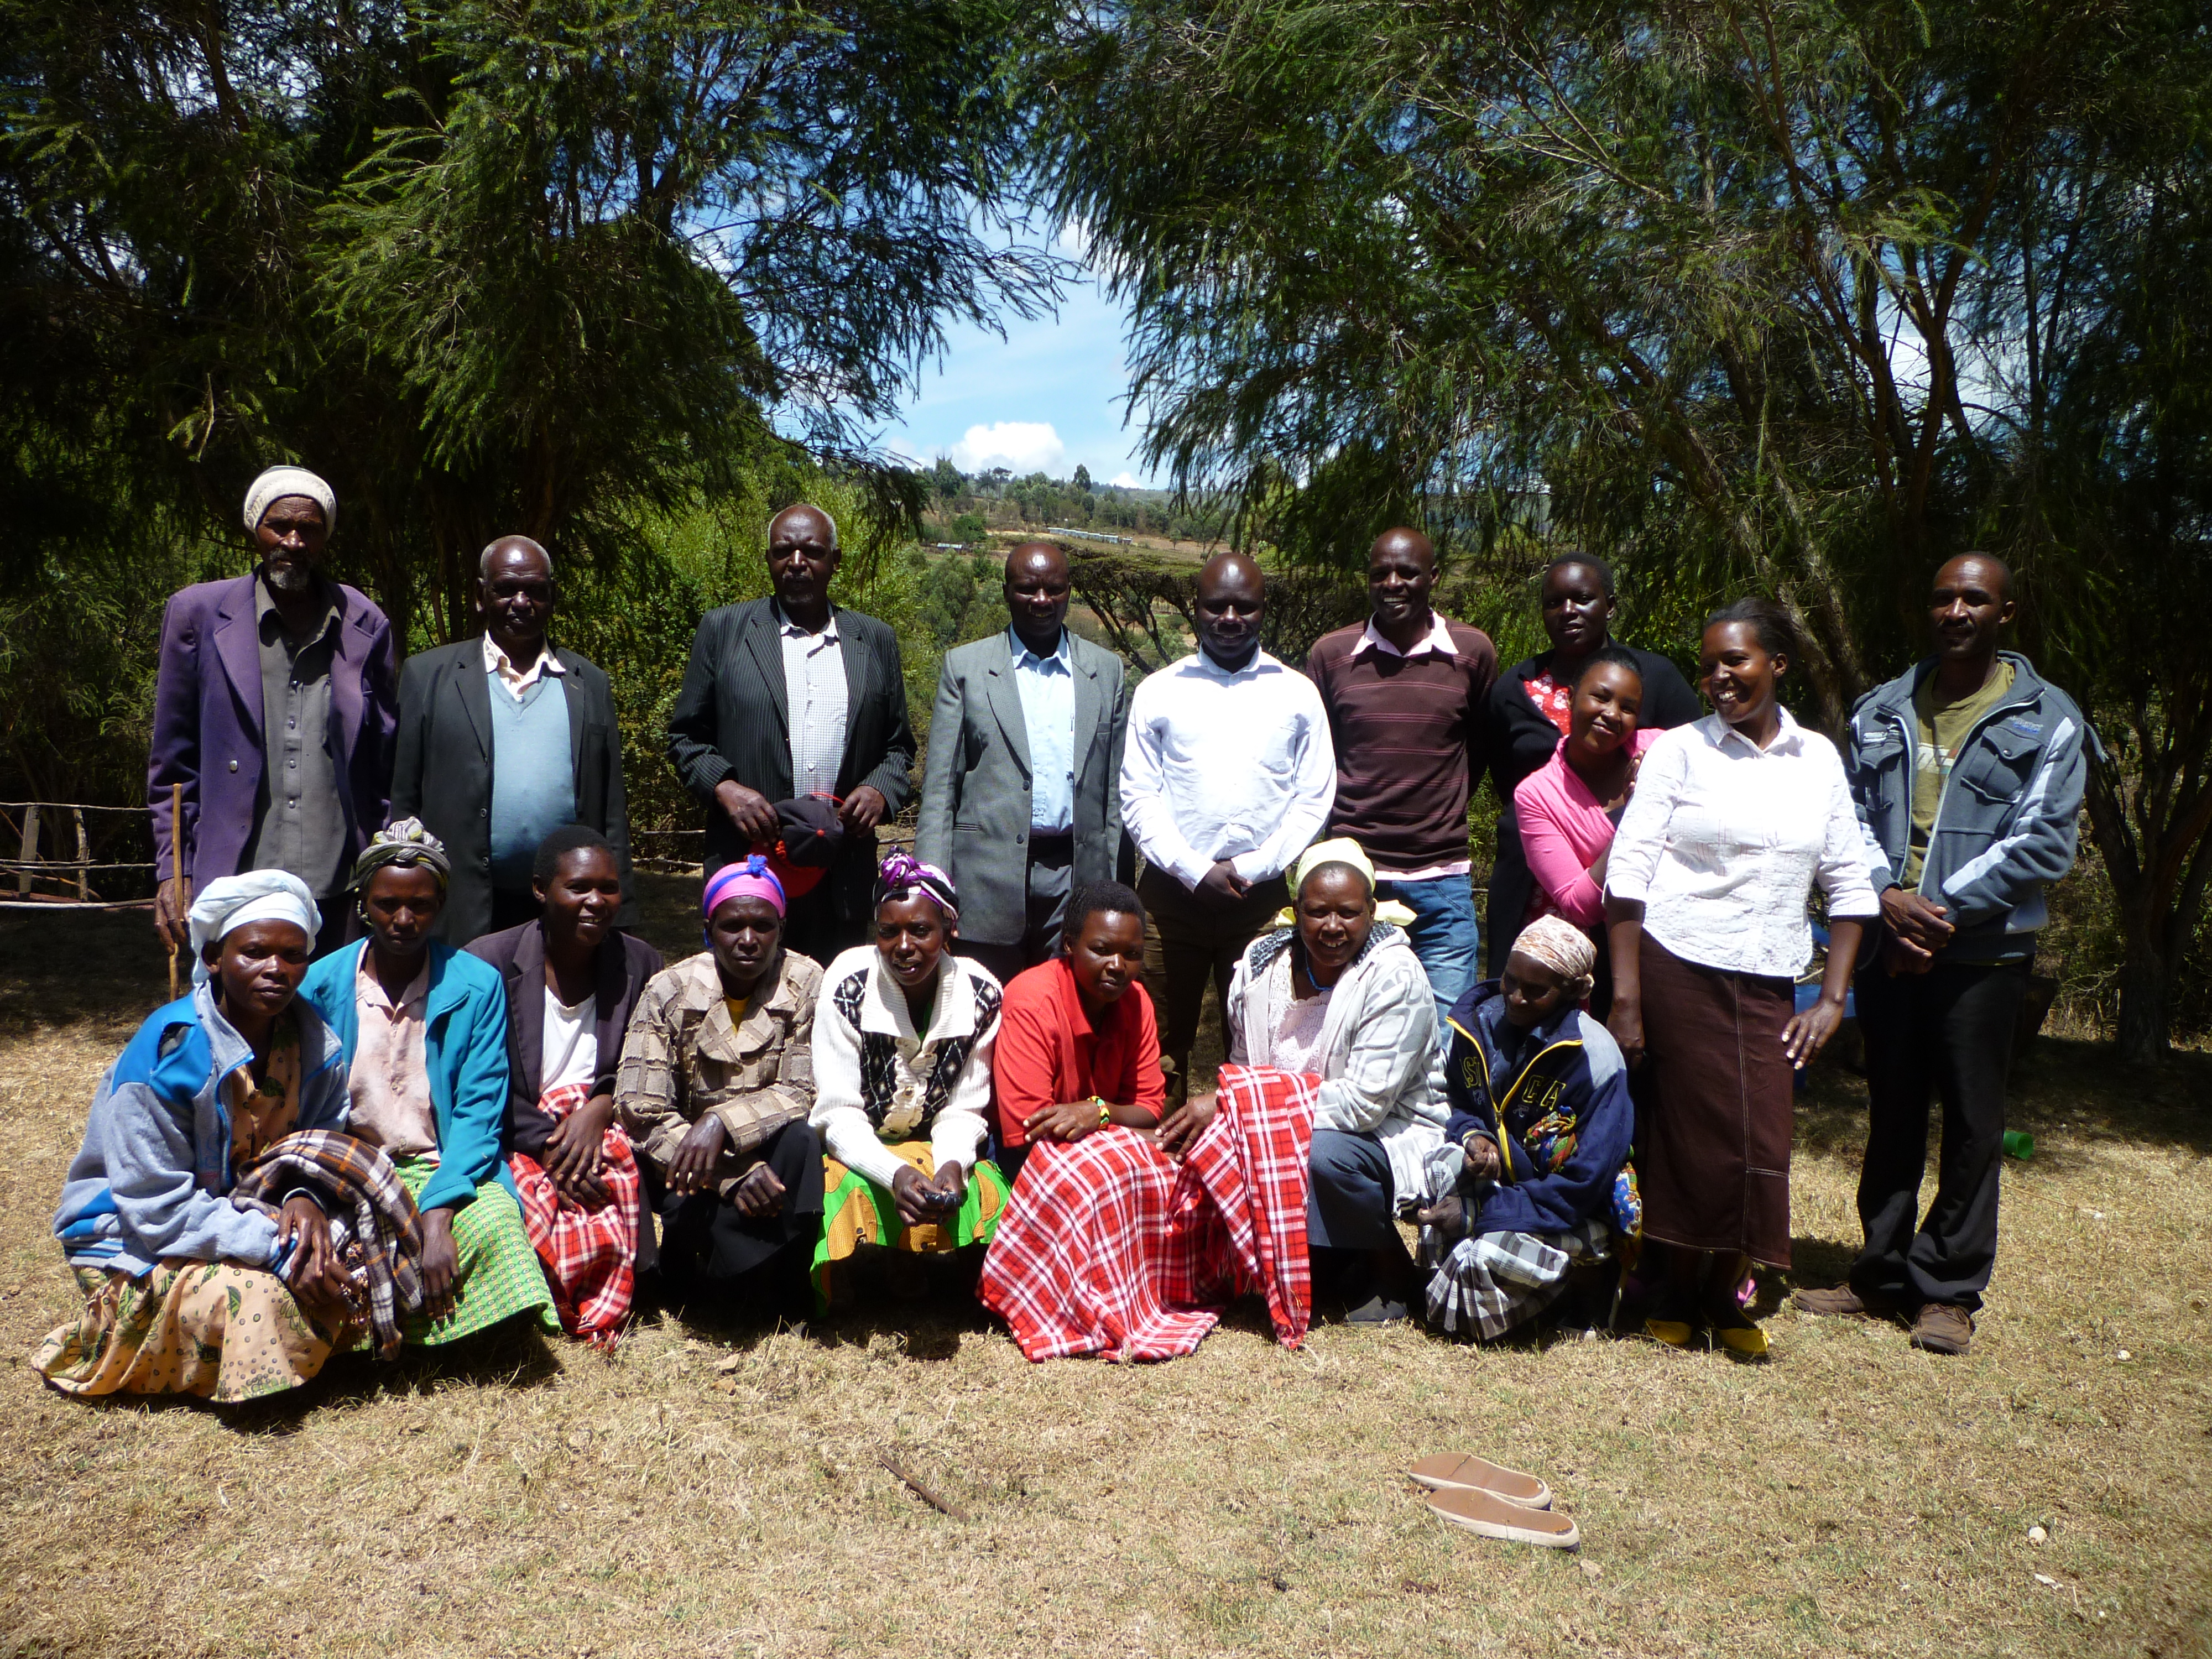 Research participants from the Kipsigis community in Mauche: The Chief, Elders and women involved in woman-to-woman marriages